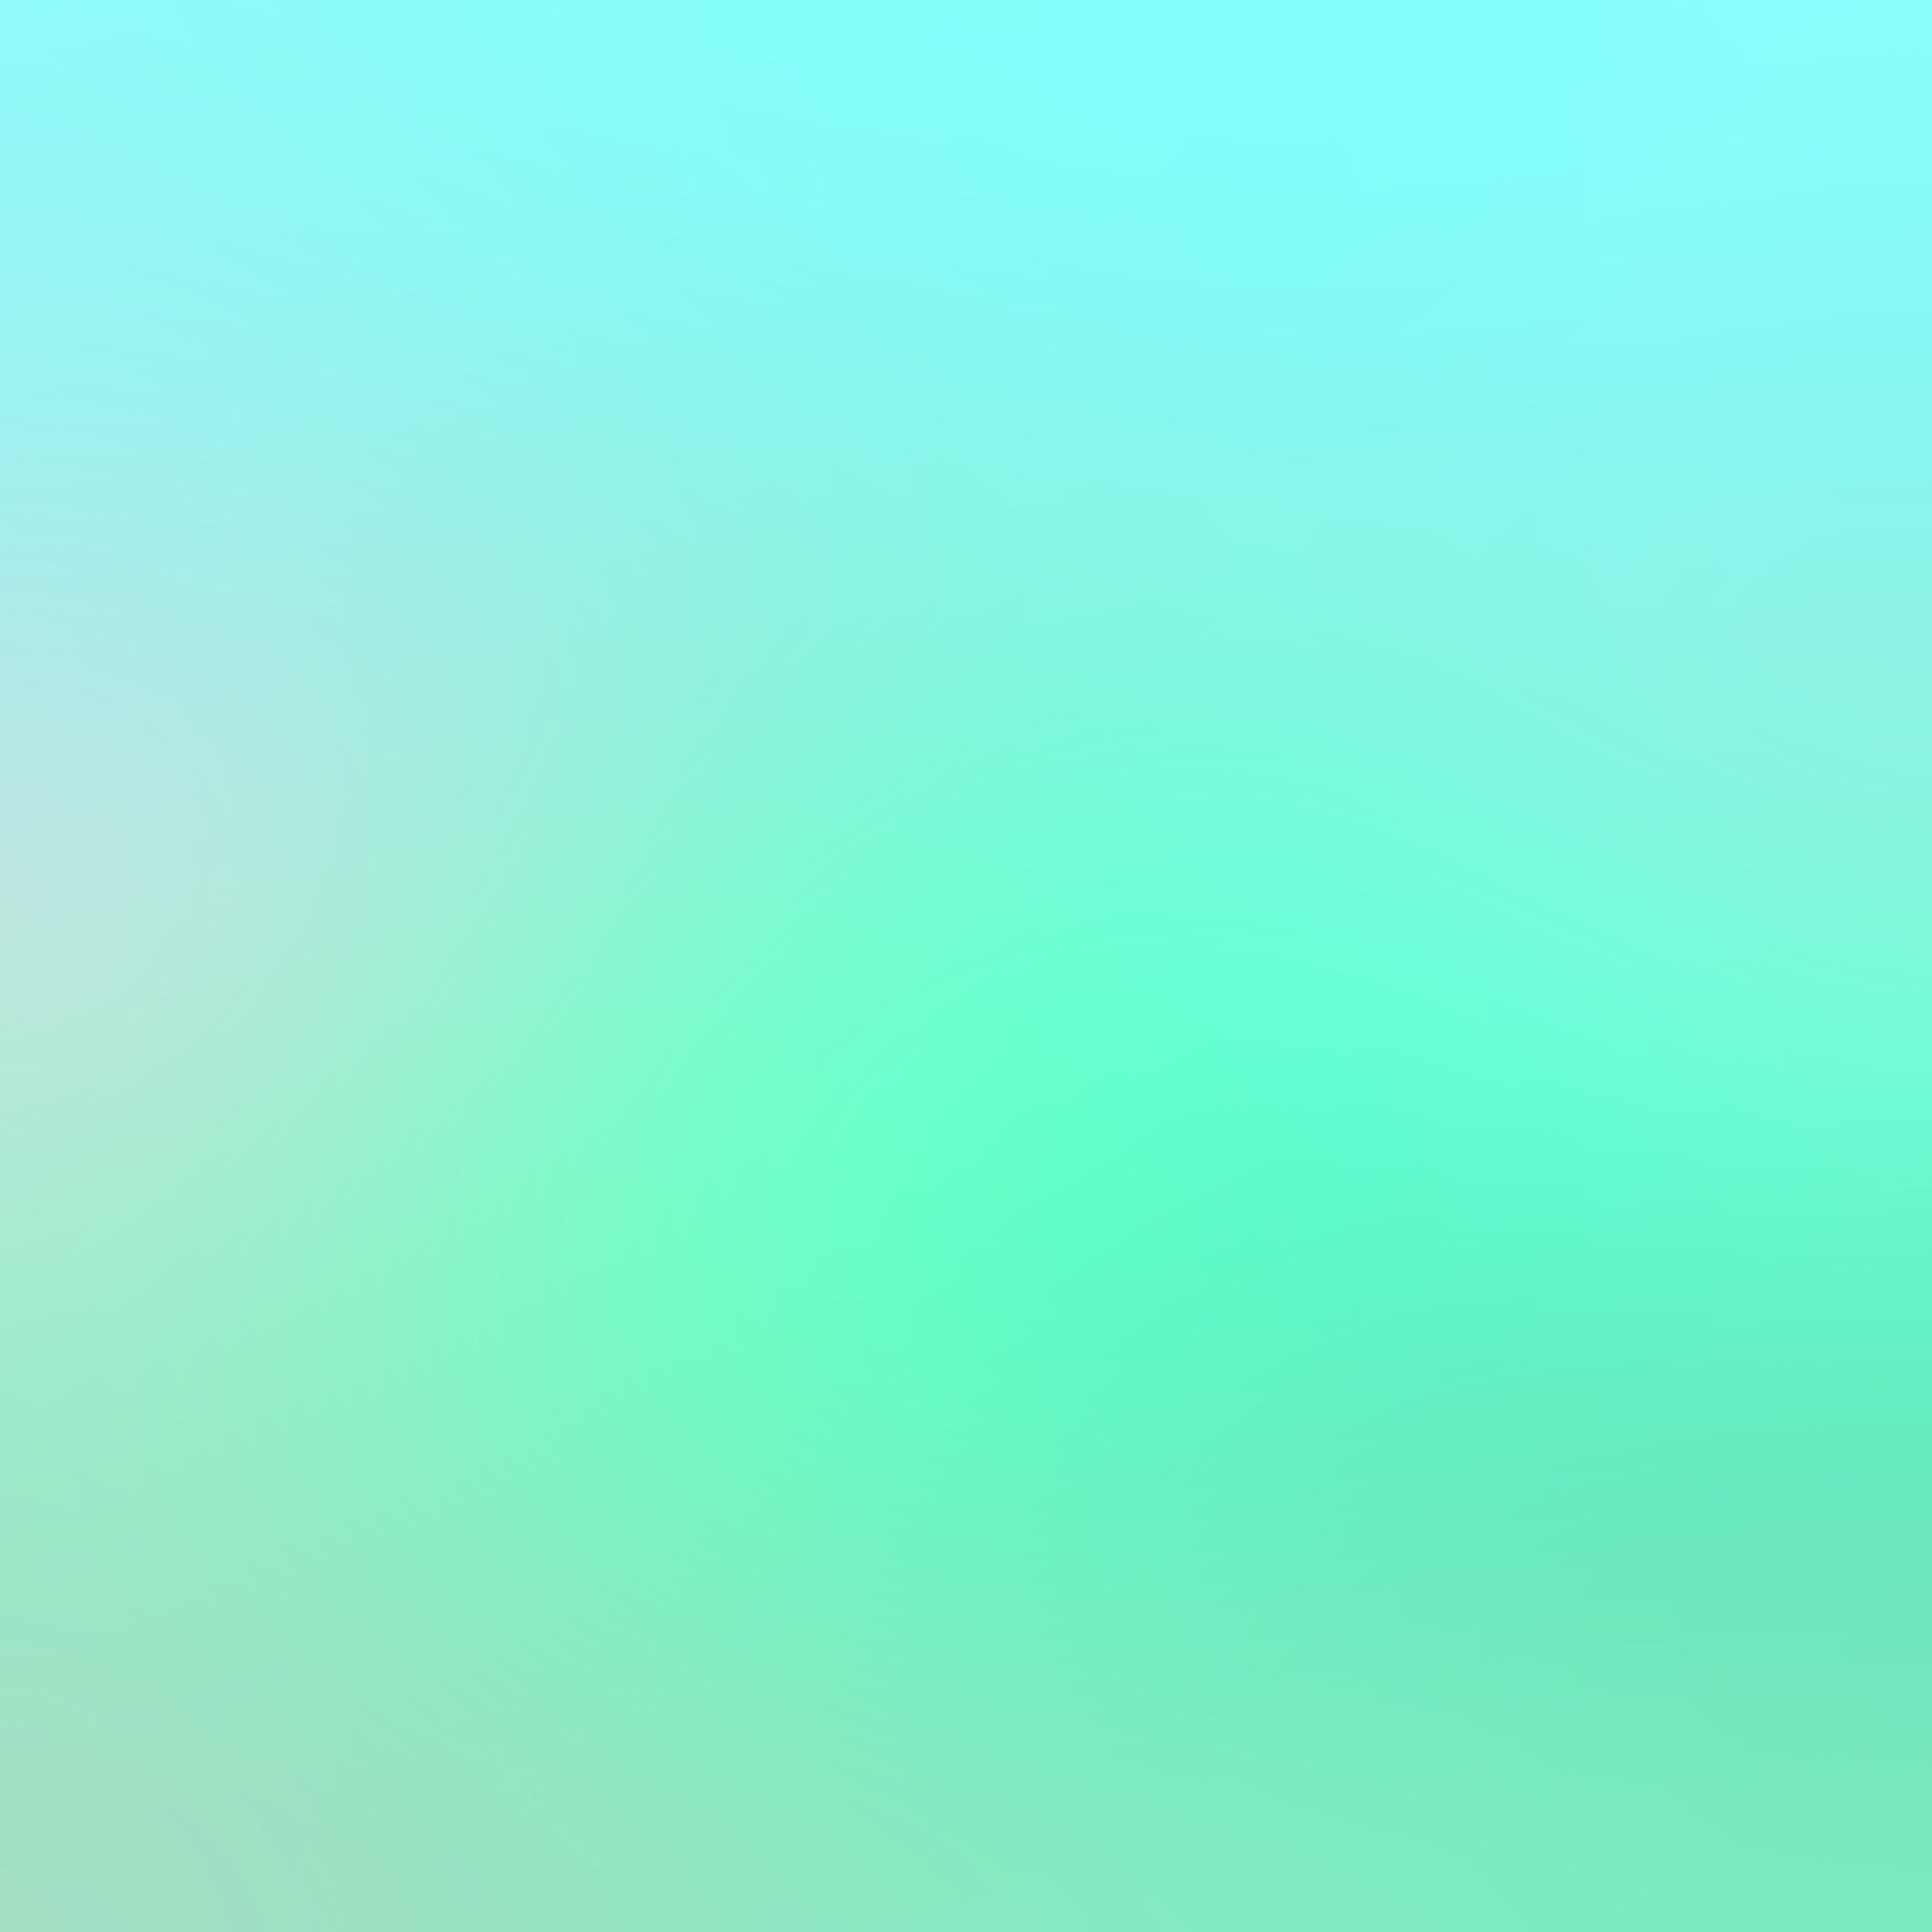 Pastel Blue And Green , HD Wallpaper & Backgrounds